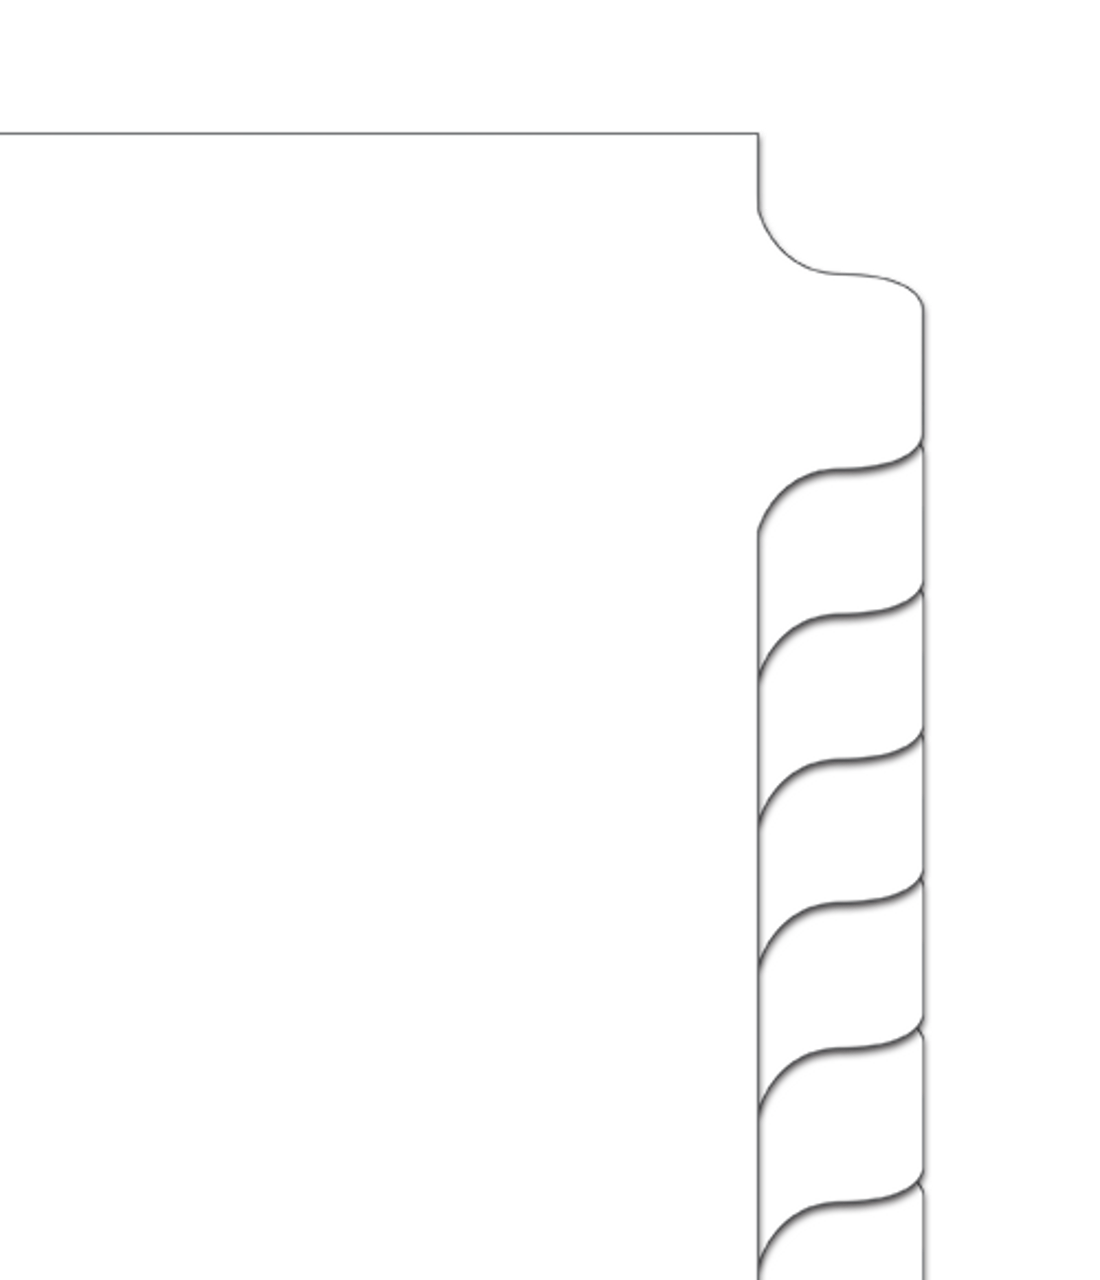 Blank - Plain Paper Collated 1/25 Cut Side Tab (Letter Size)